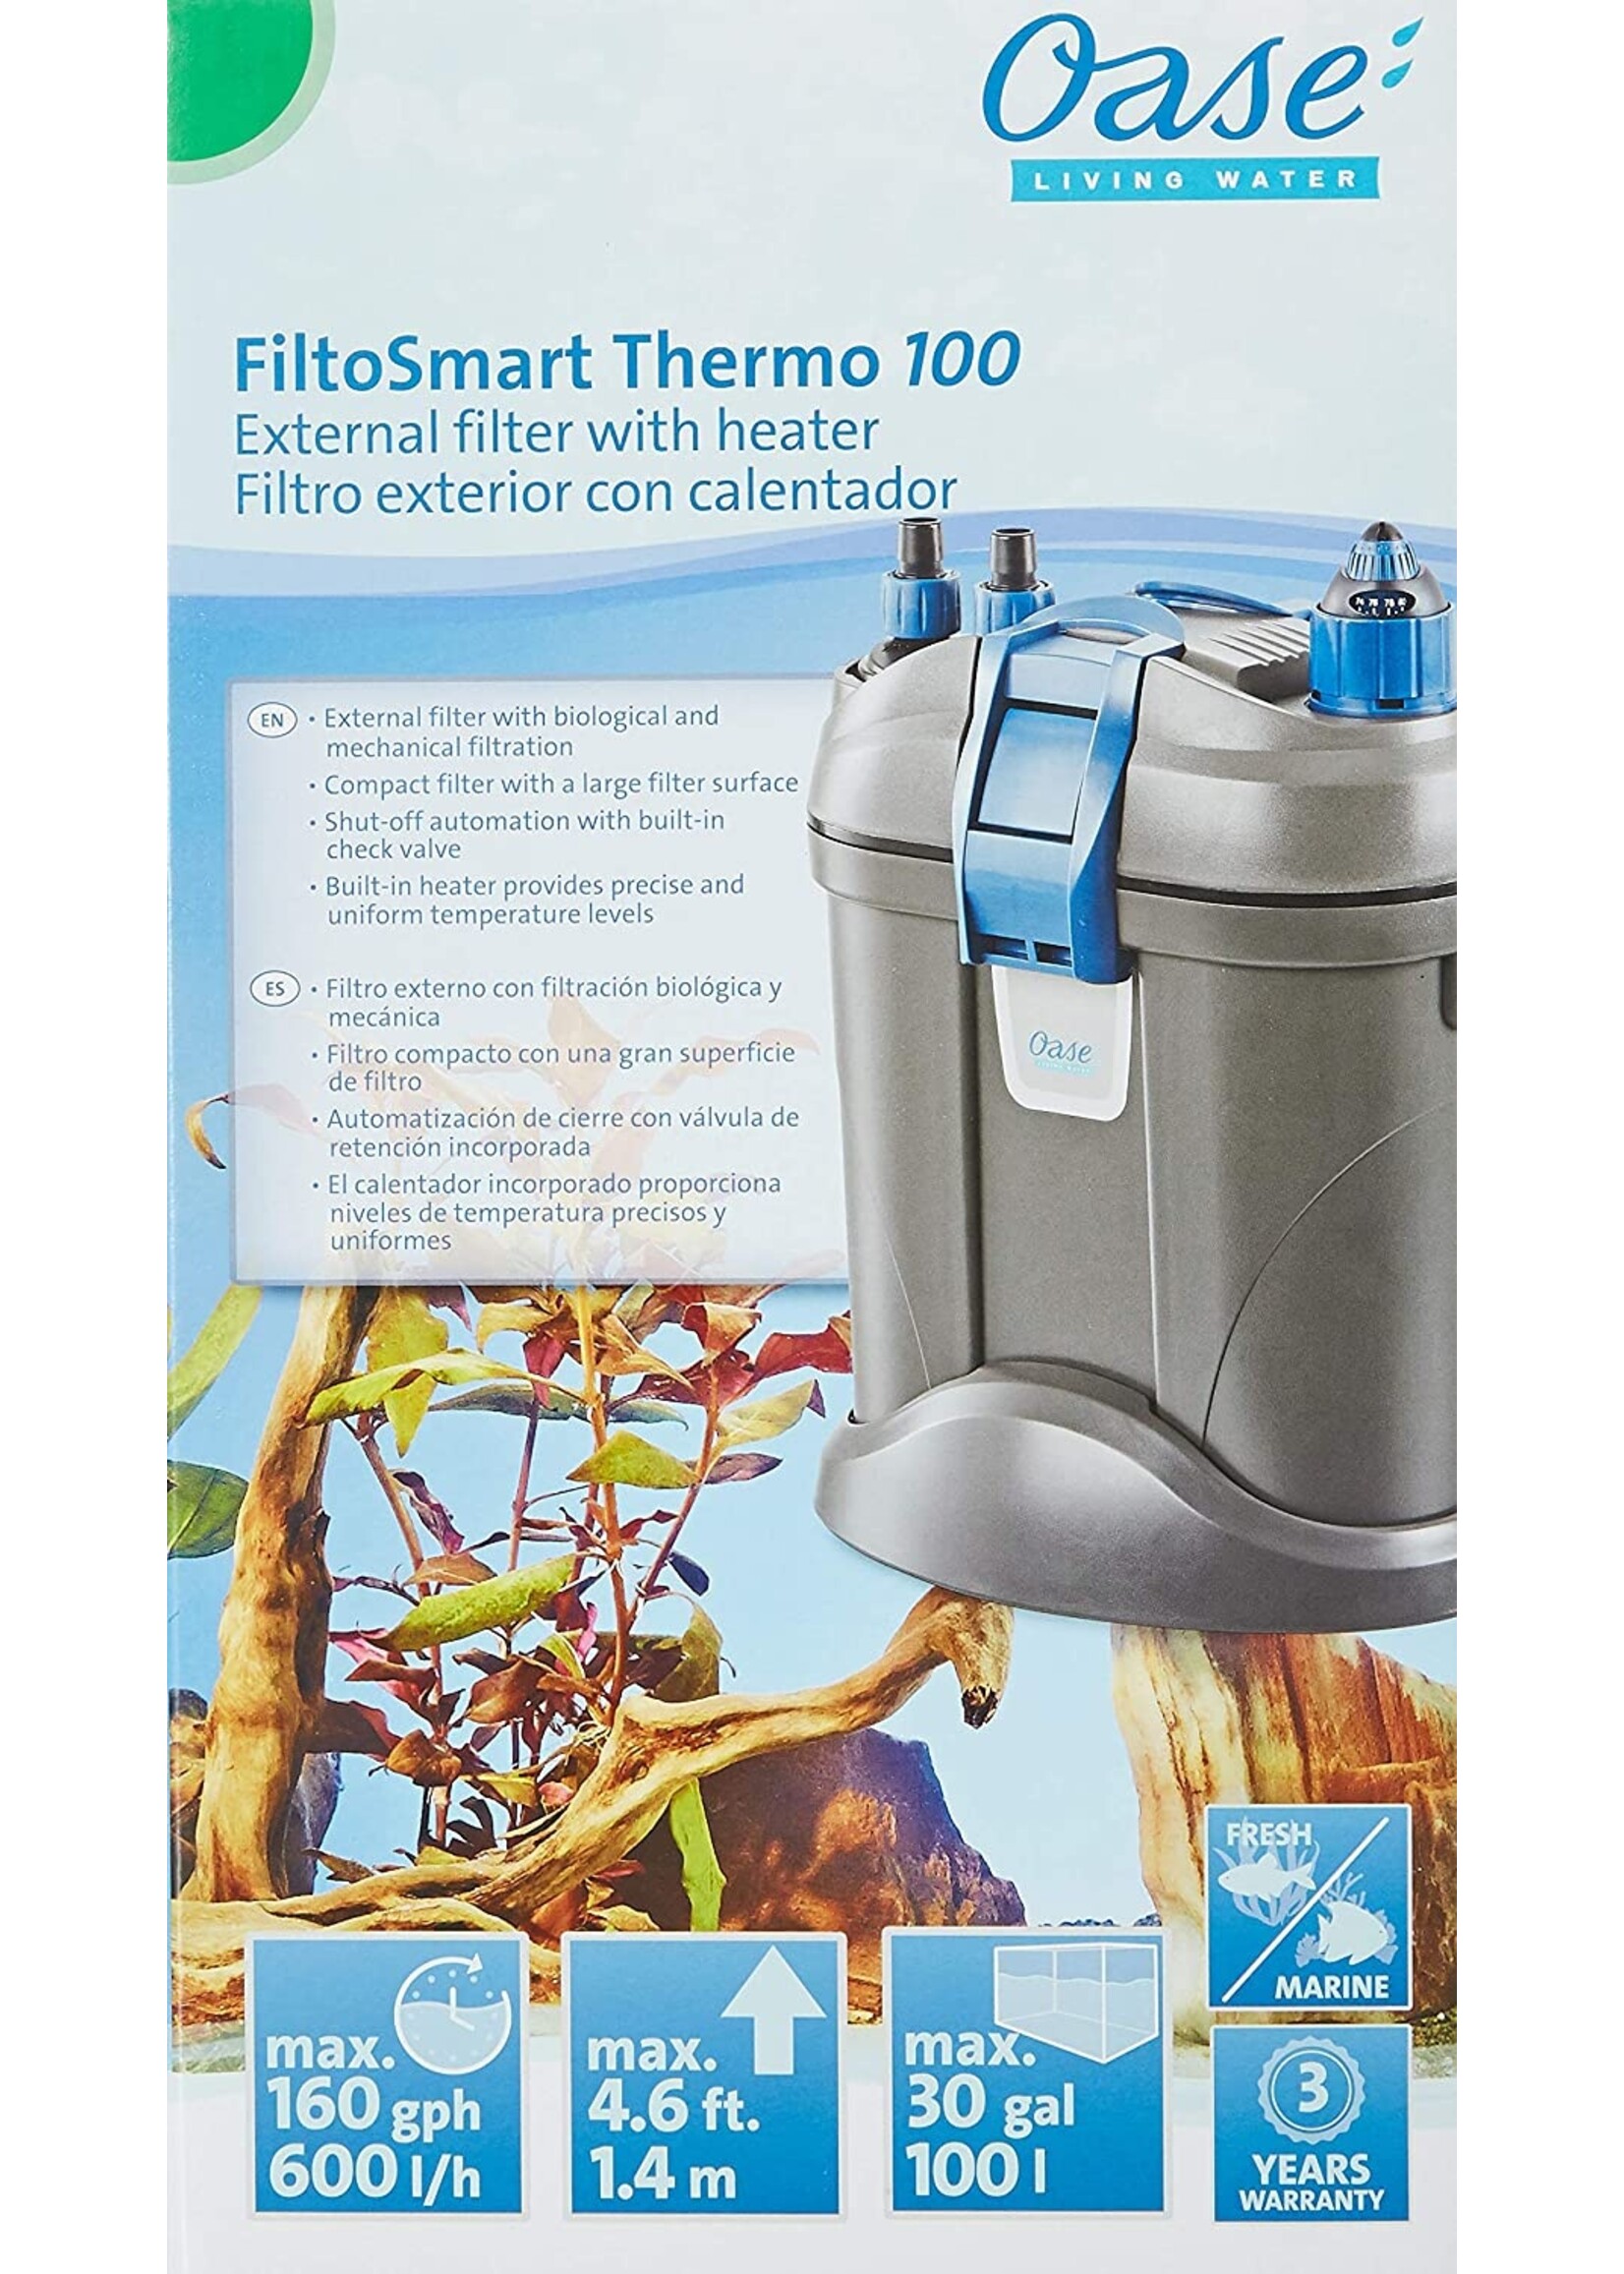 OASE FILTOSMART THERMO 100 EXTERNAL CANISTER FILTER